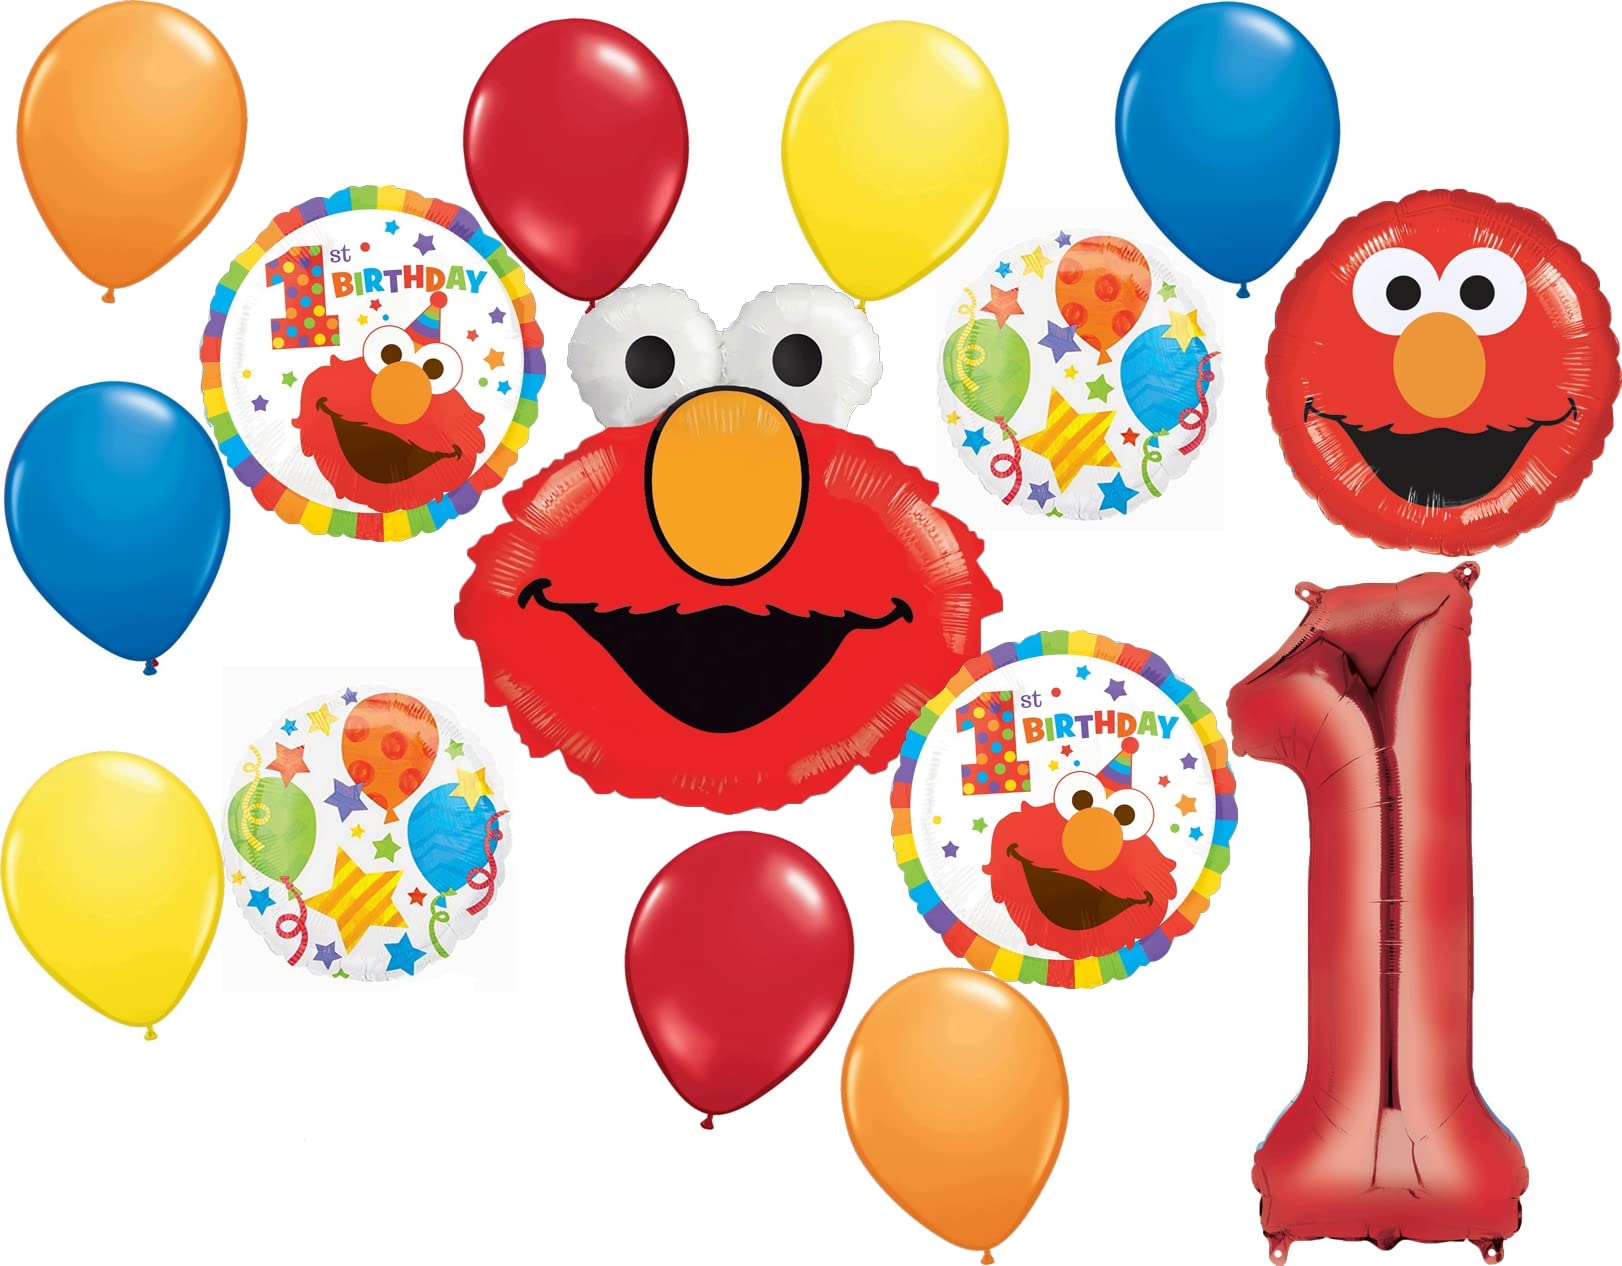 Mayflower Products Elmo 1st Birthday Party Supplies Balloon Bouquet Decorations